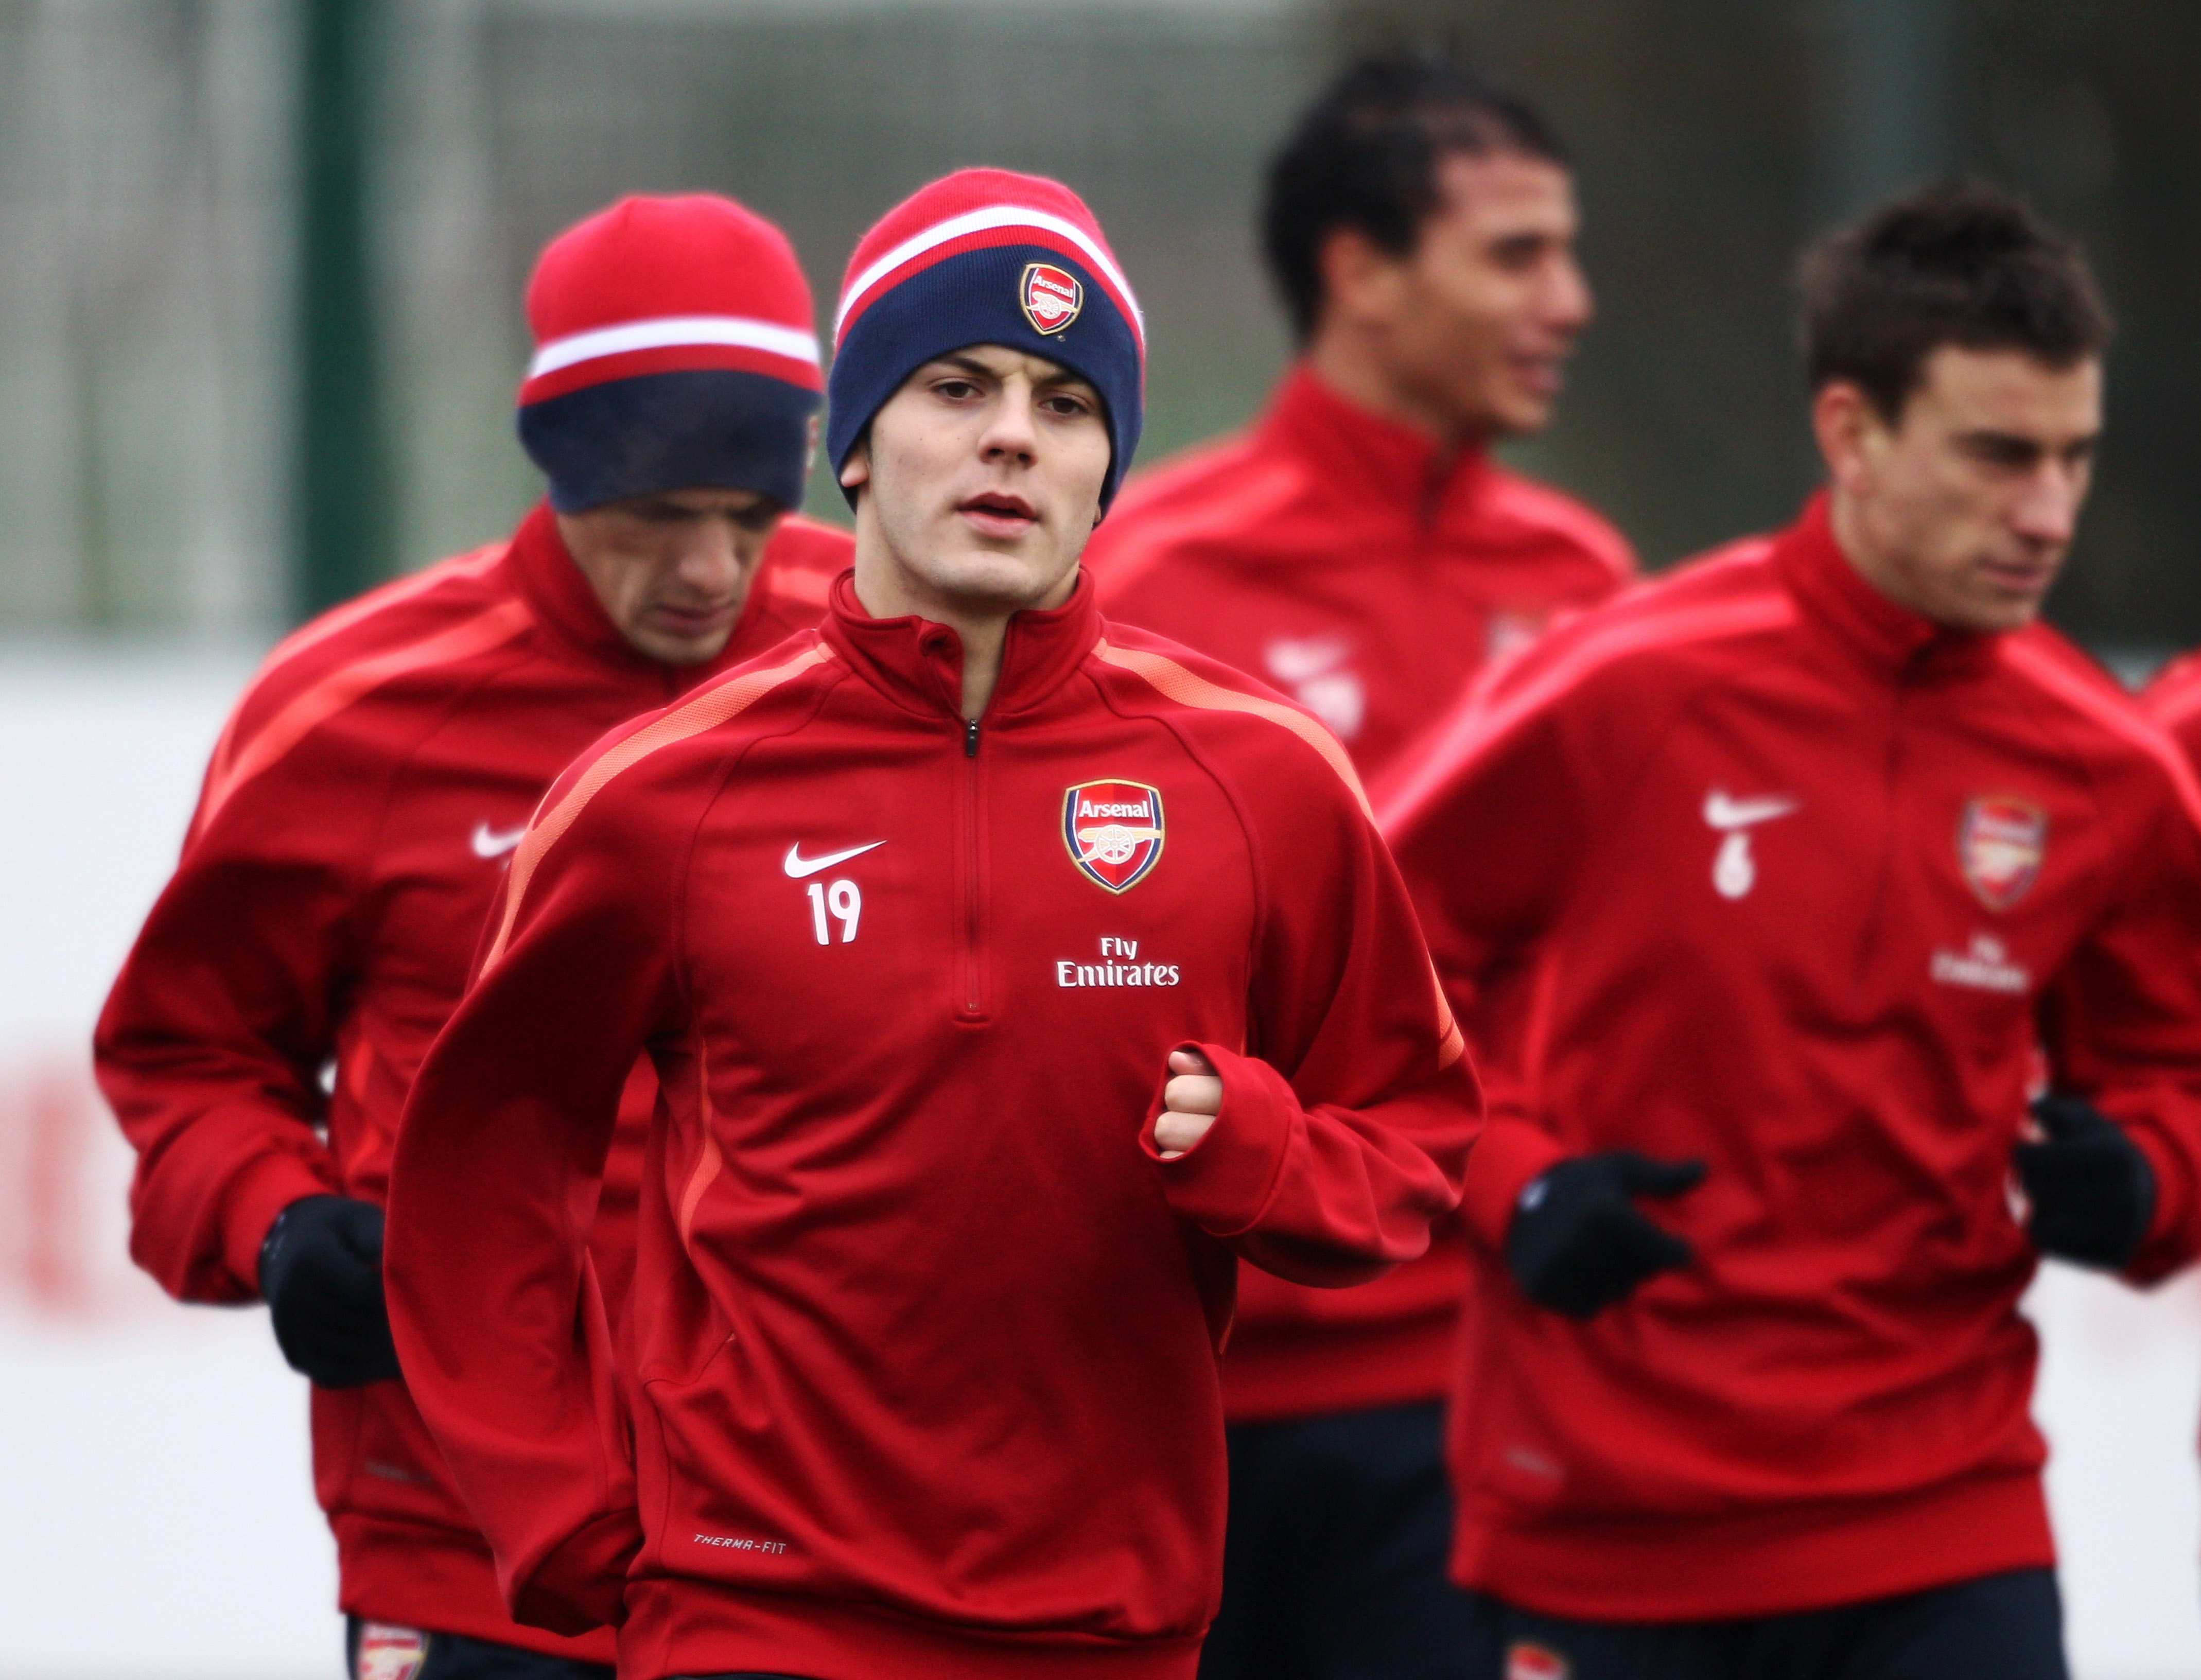 ST ALBANS, ENGLAND - DECEMBER 15:  Jack Wilshere runs during the Arsenal Training Session at London Colney on December 15, 2010 in St Albans, England.  (Photo by Dean Mouhtaropoulos/Getty Images)